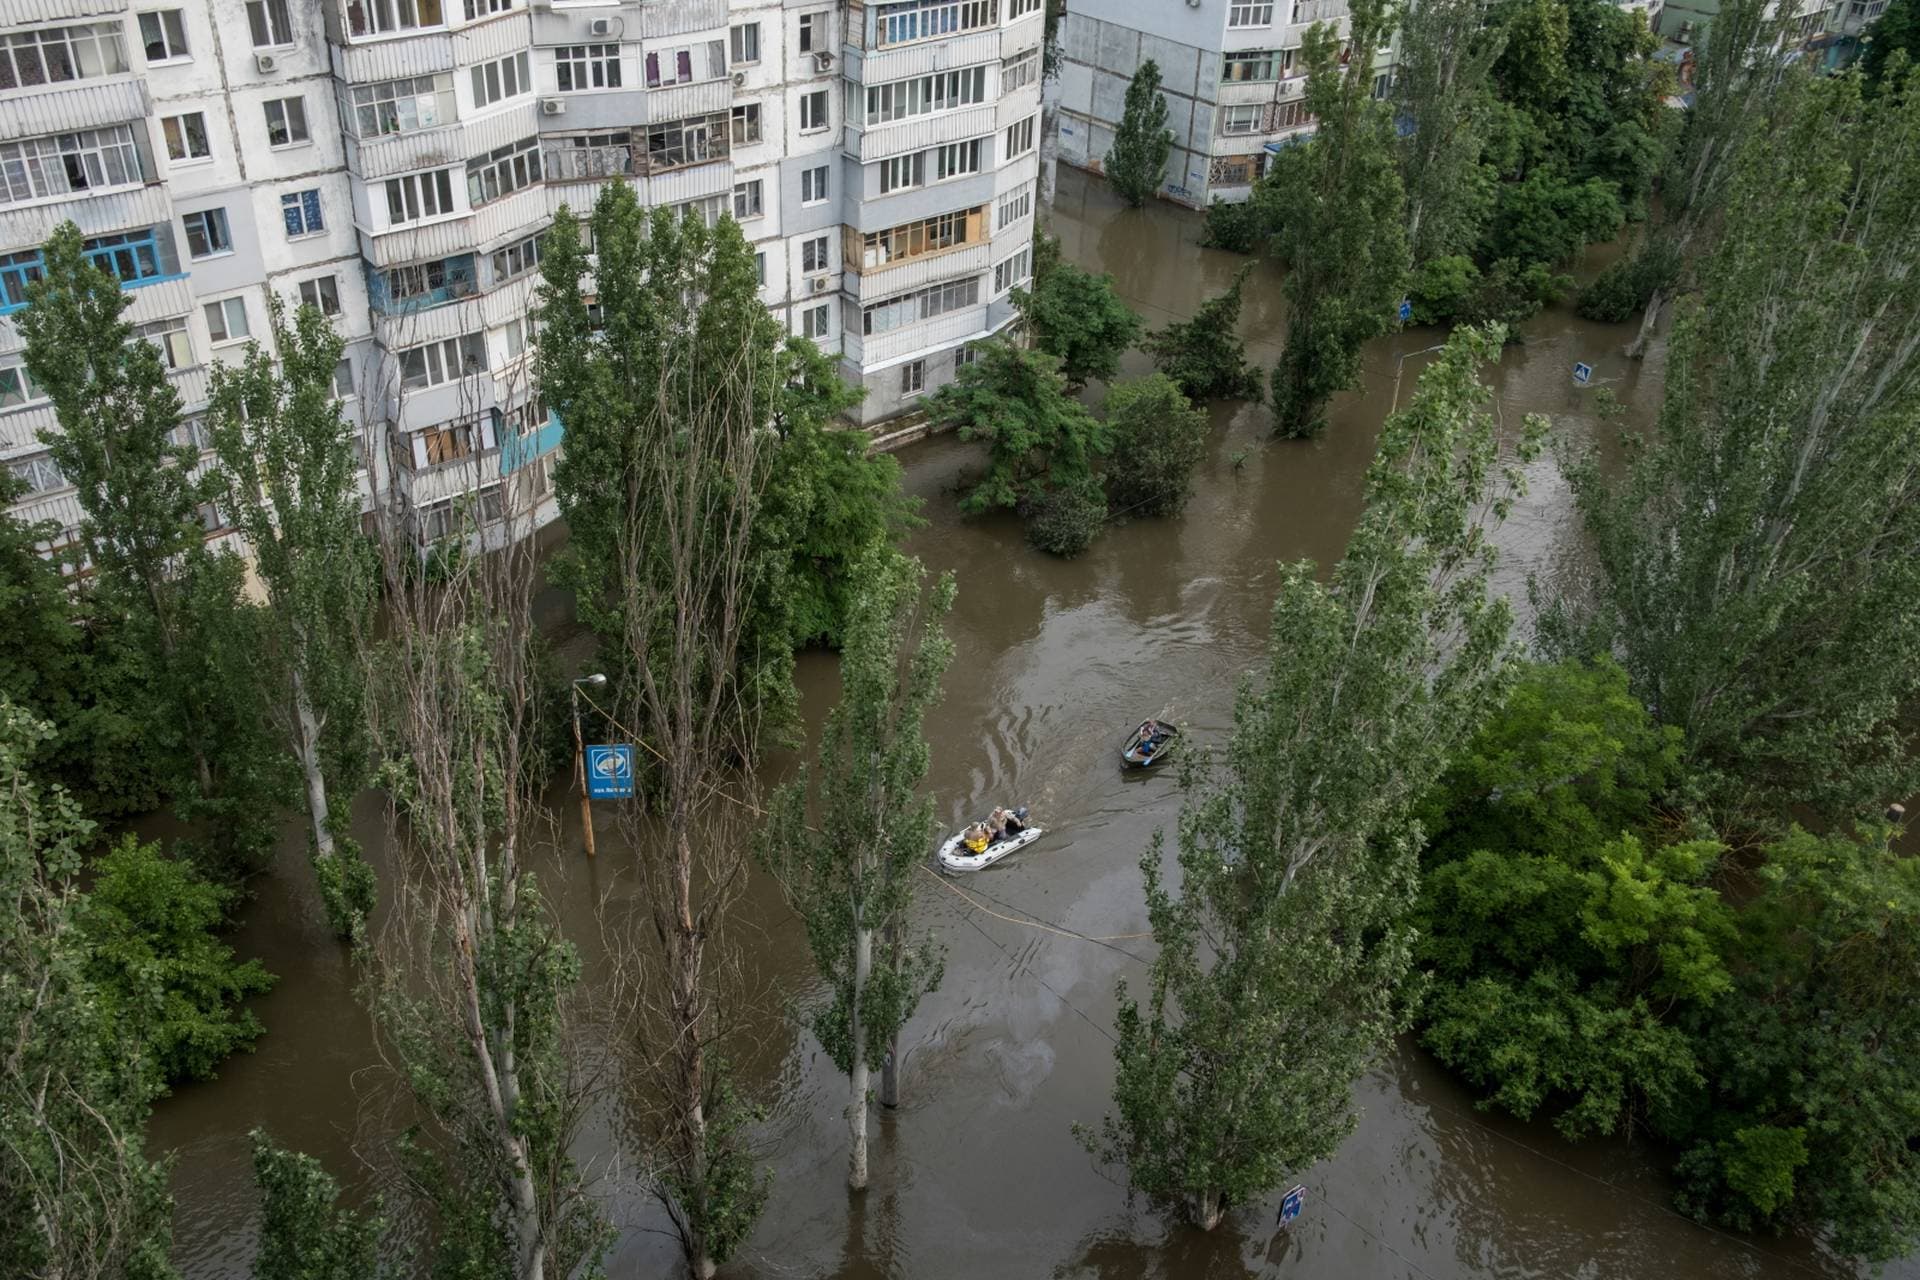 A general view shows residents using rubber boats as they evacuate from a flooded area of Kherson